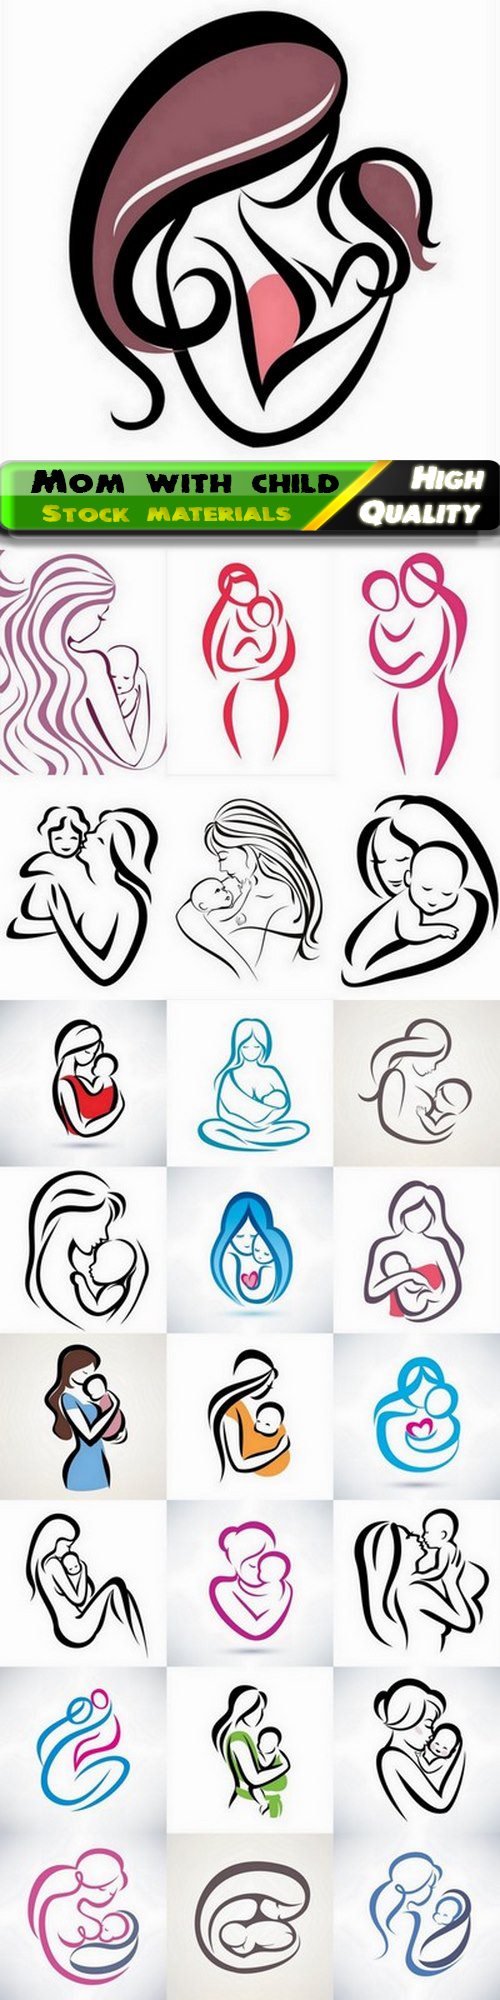 Maternity care and mom with child and woman with baby logo - 25 Eps